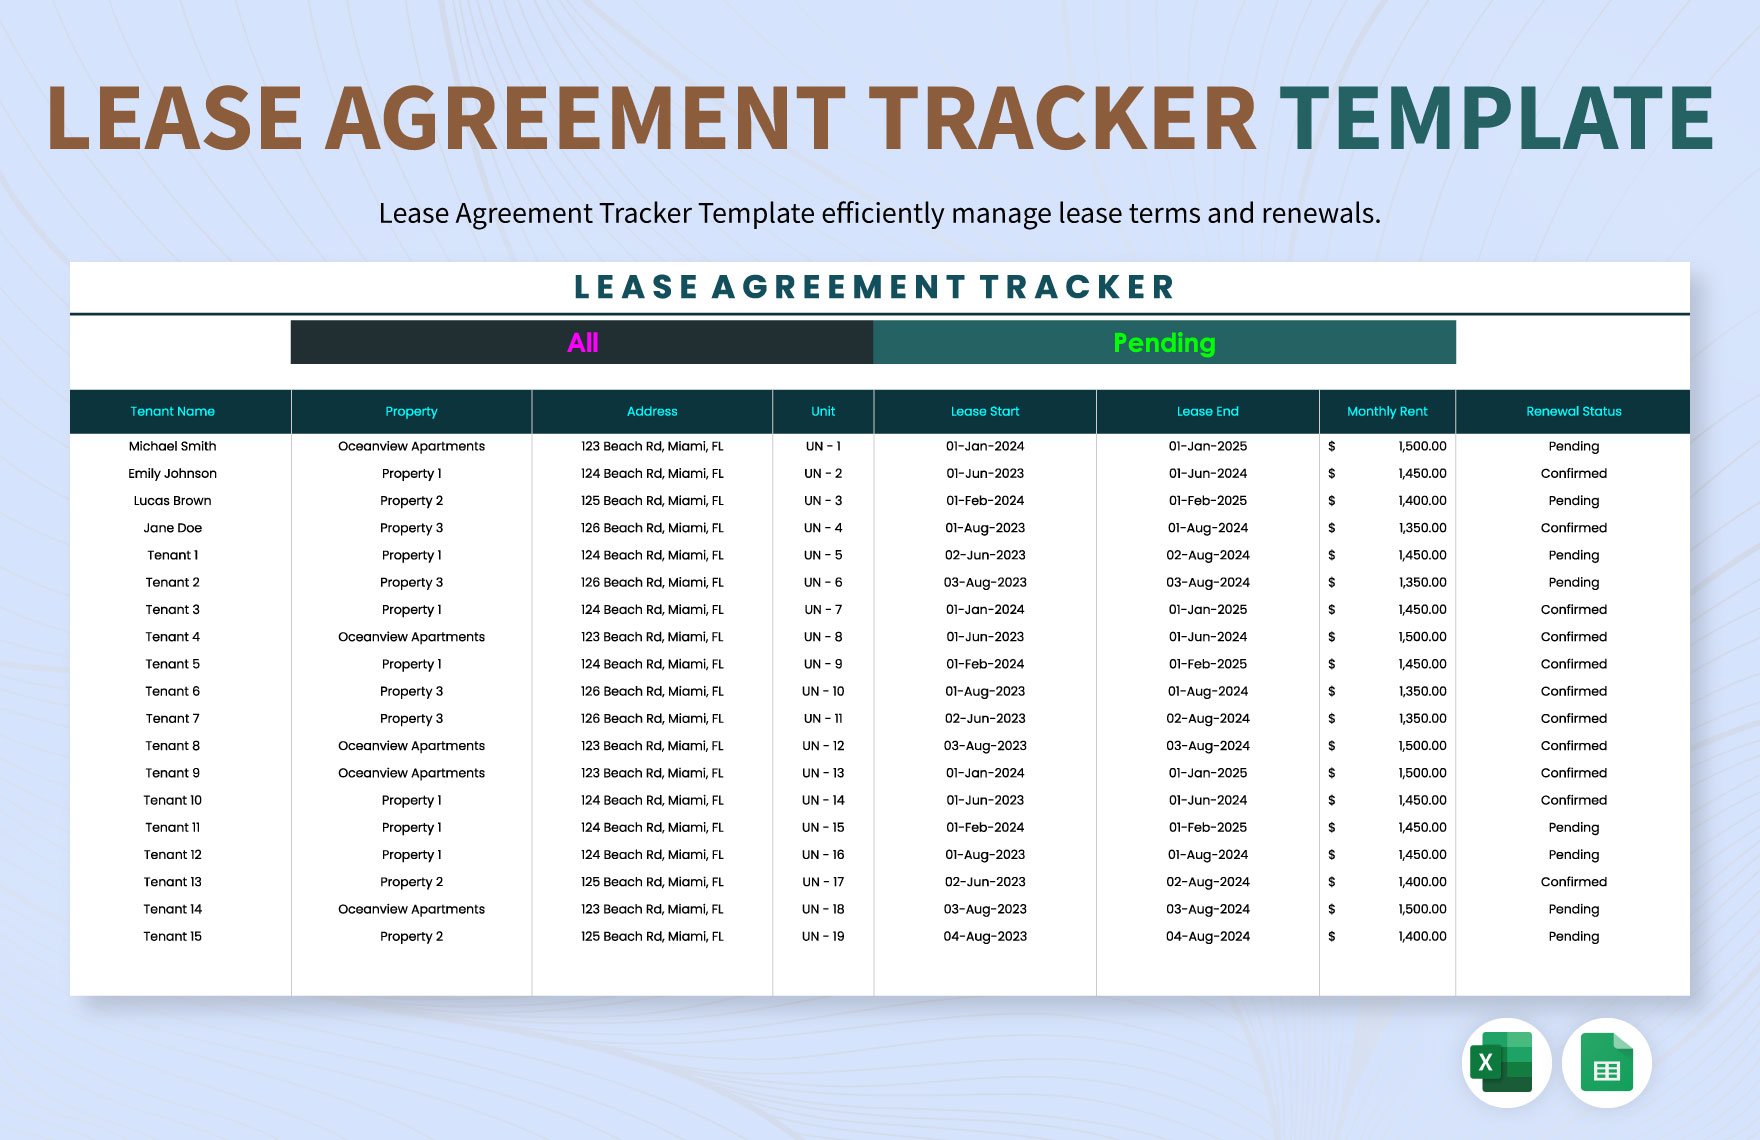 Lease Agreement Tracker Template in Excel, Google Sheets